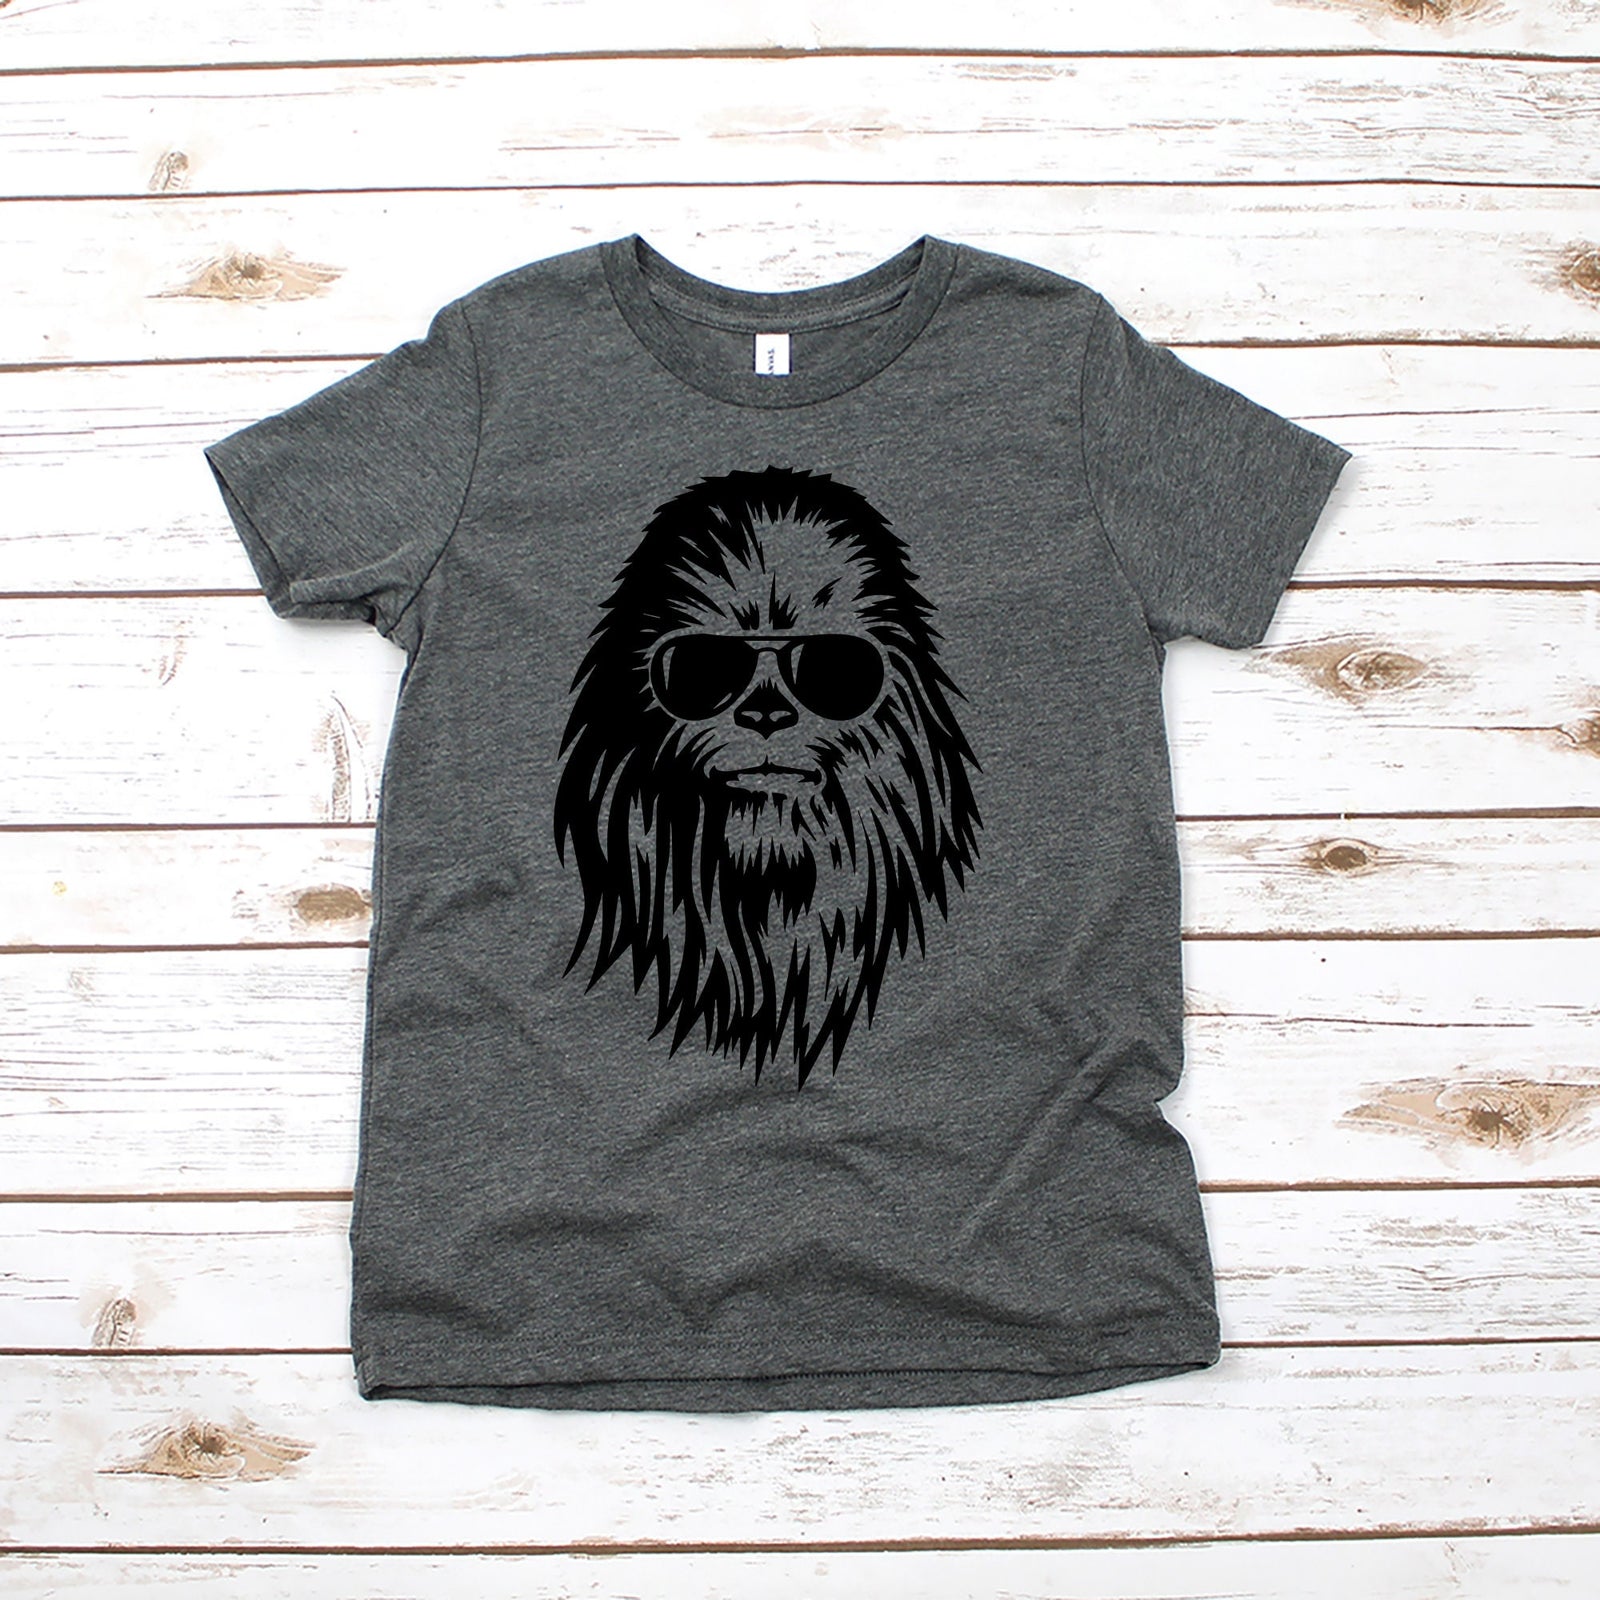 Chewbacca With Sunglasses Star Wars Mickey Mouse Youth T Shirt - Disney Kids T Shirts - Family Star Wars Matching Shirts